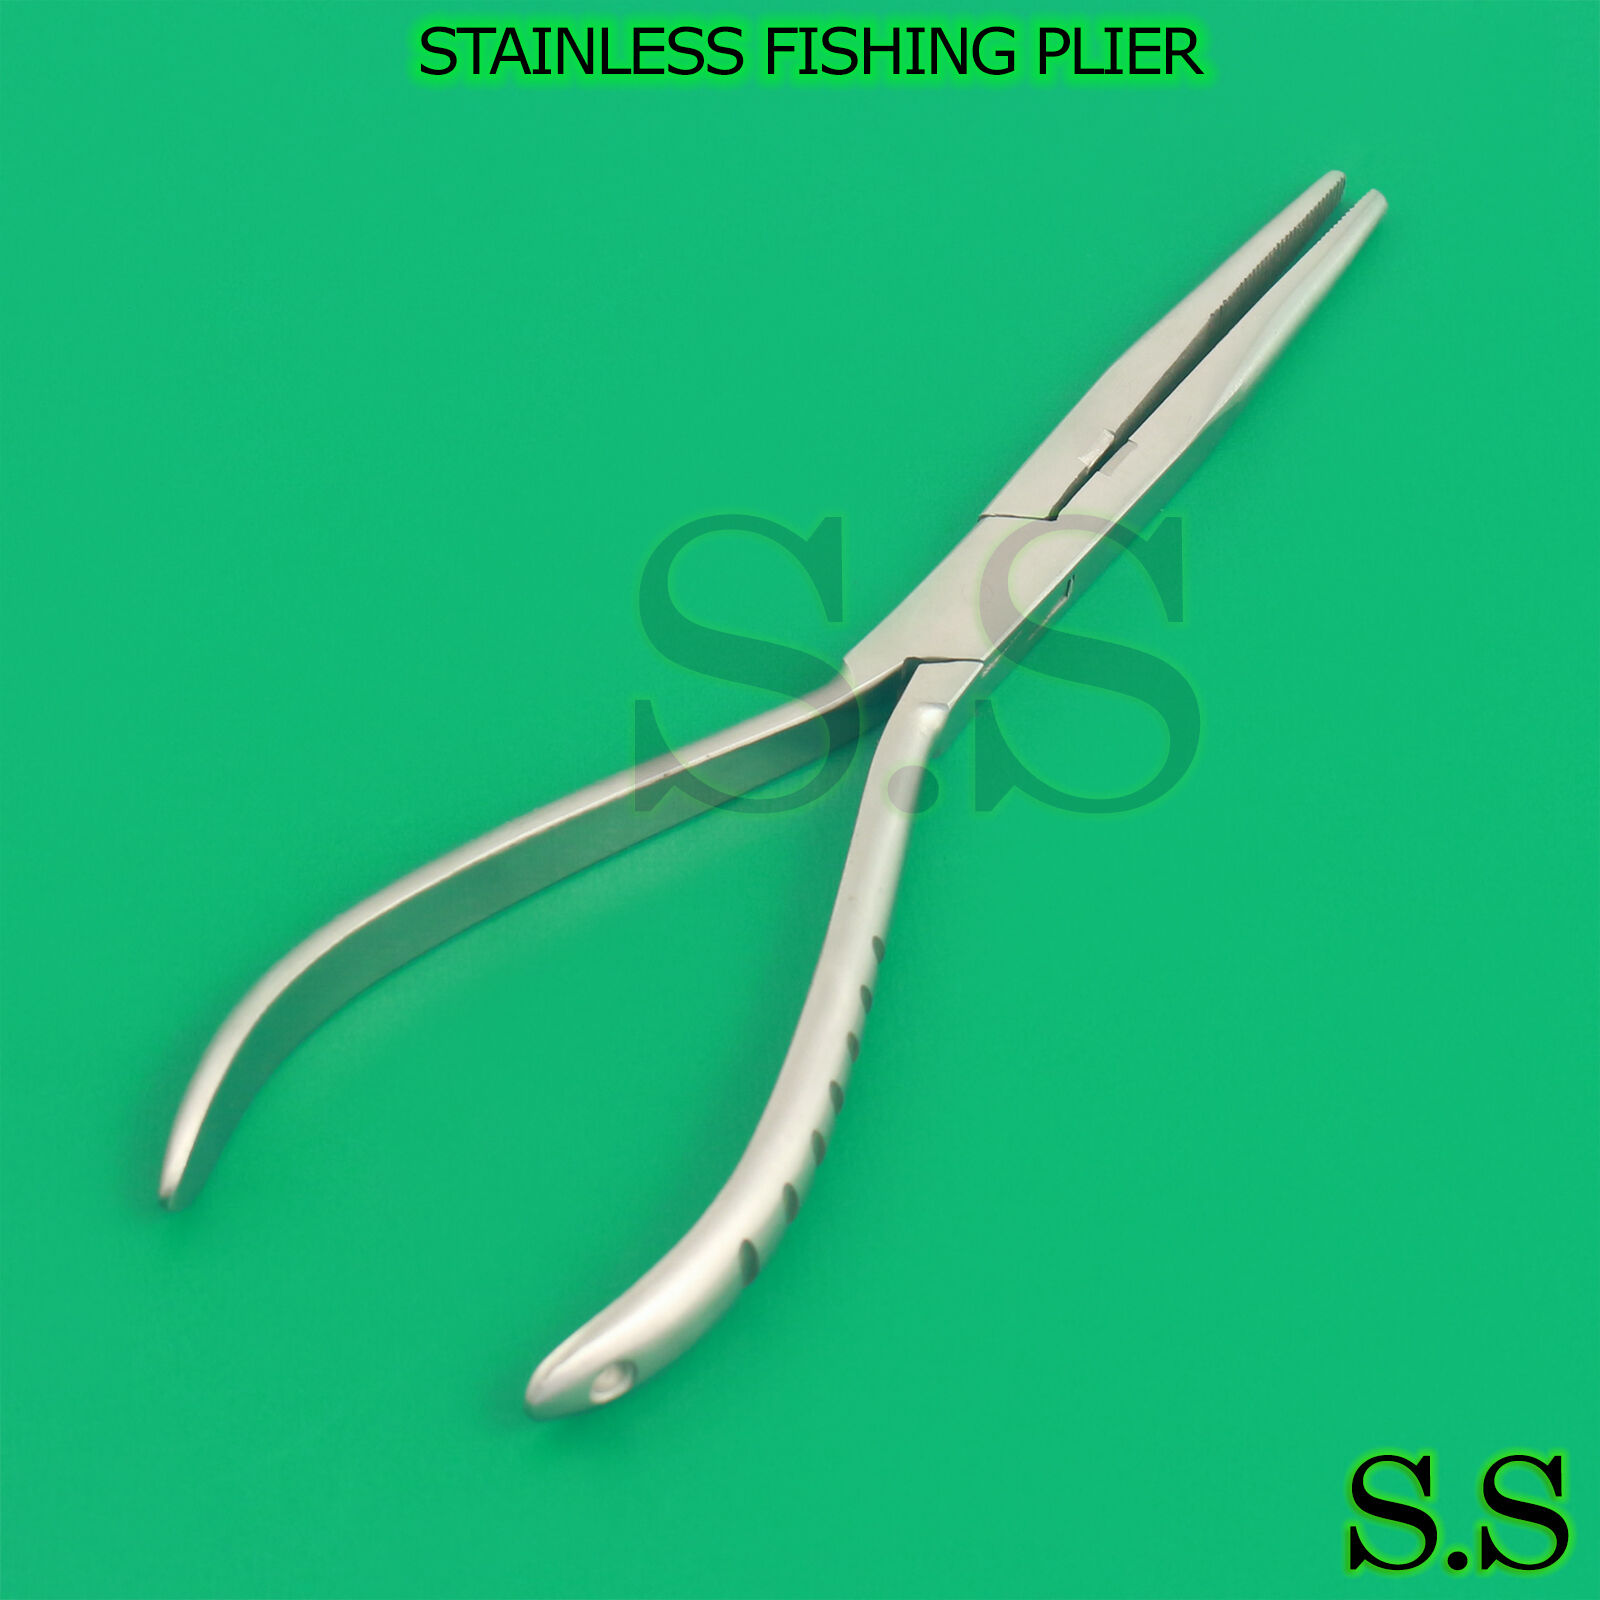 8" STAINLESS FISHING PLIER  5 pieces  S.S Does Not Apply